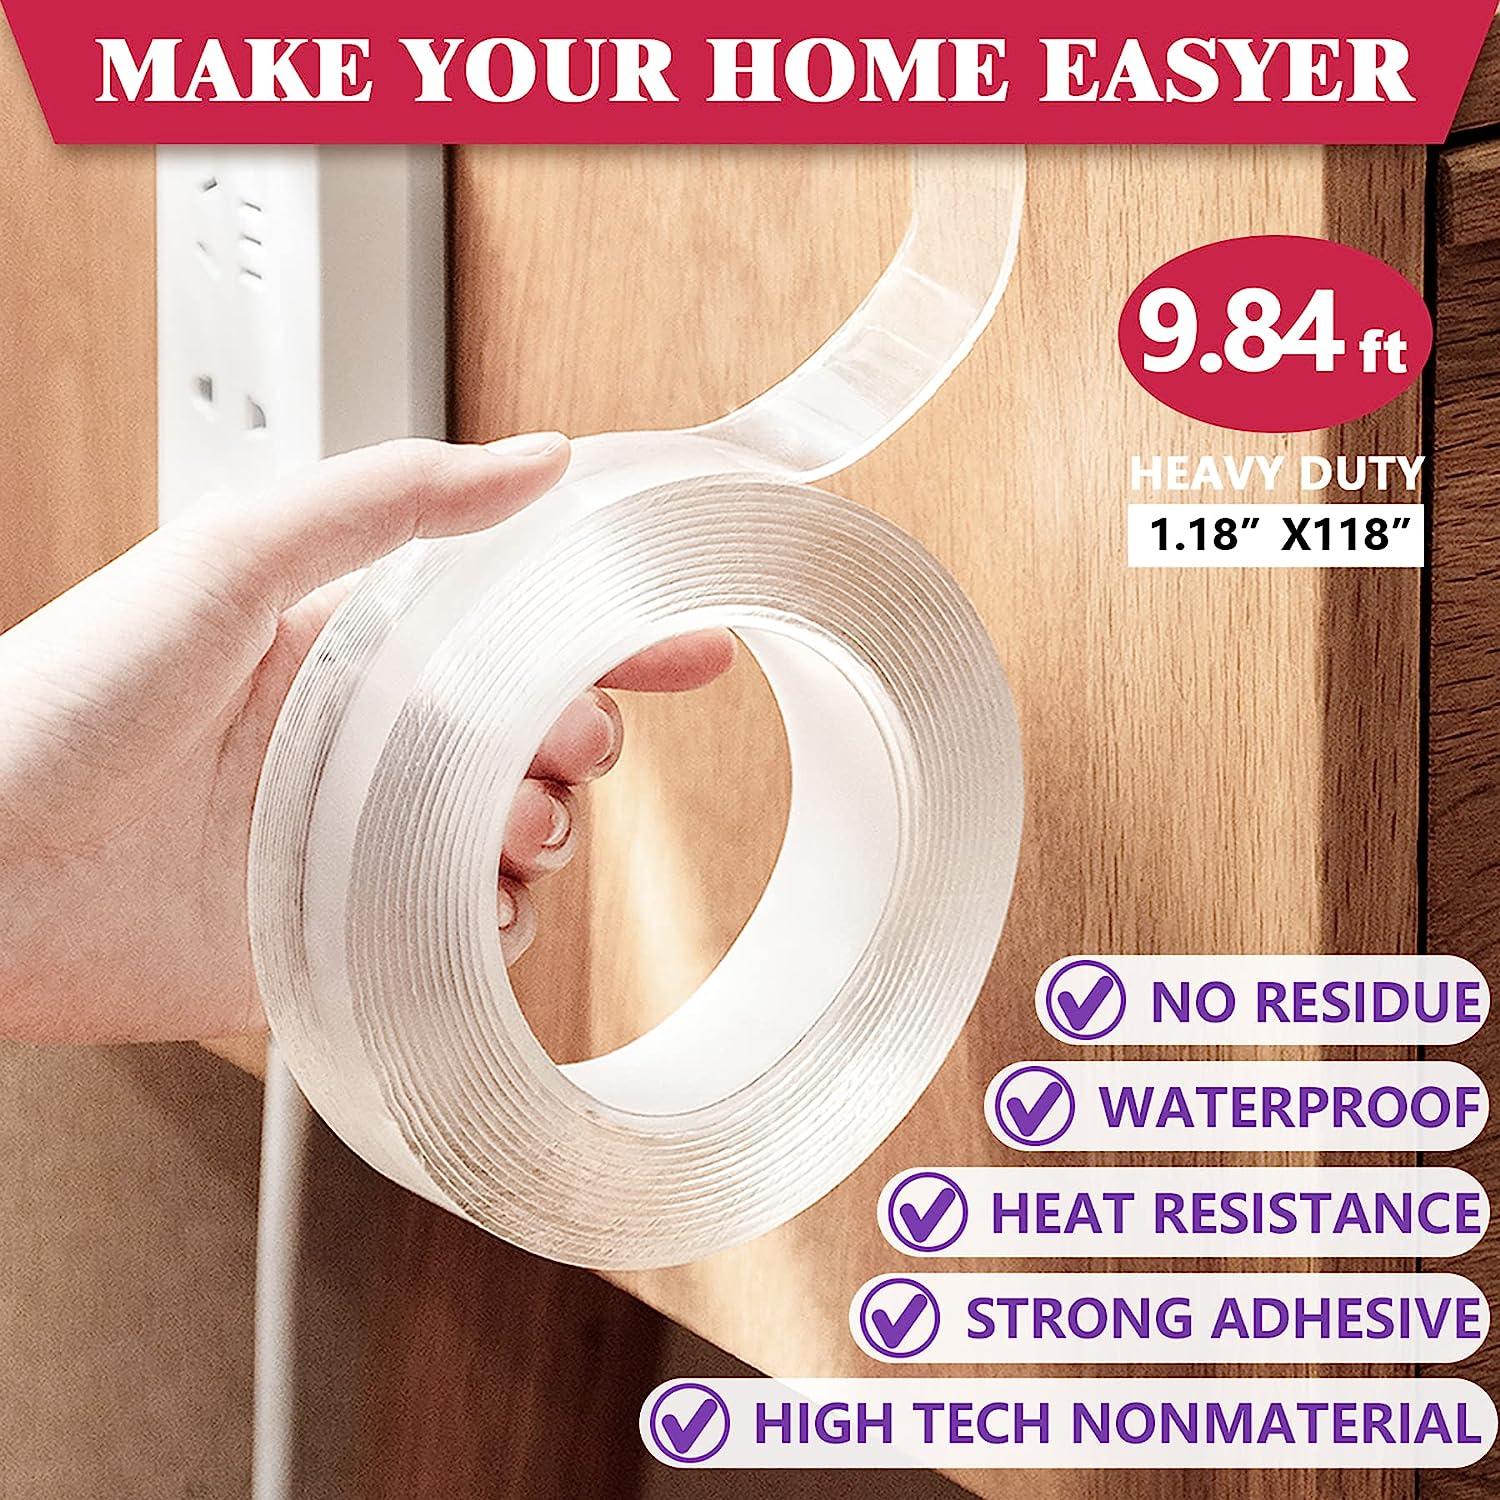 Nano Double Sided Poster tape Heavy Duty Multipurpose Hanging Adhesive  strips Strong Sticky Mounting tape Picture Gel tape (Transparent 9.84FT)  9.84FT Transparent